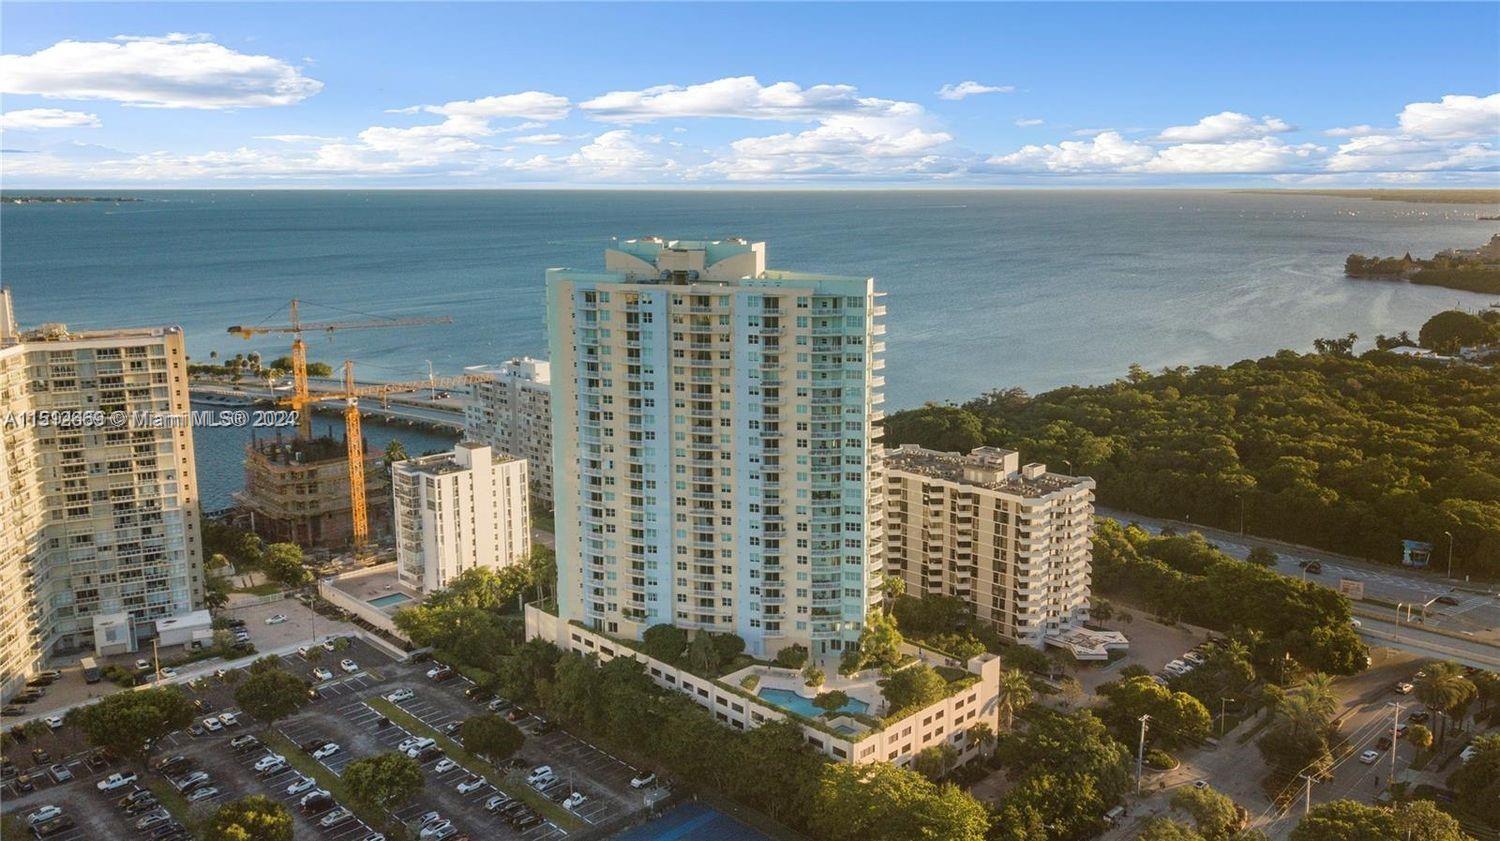 Imagine living in the heart of Miami's vibrant lifestyle at condo #1606. Just blocks away, you have 